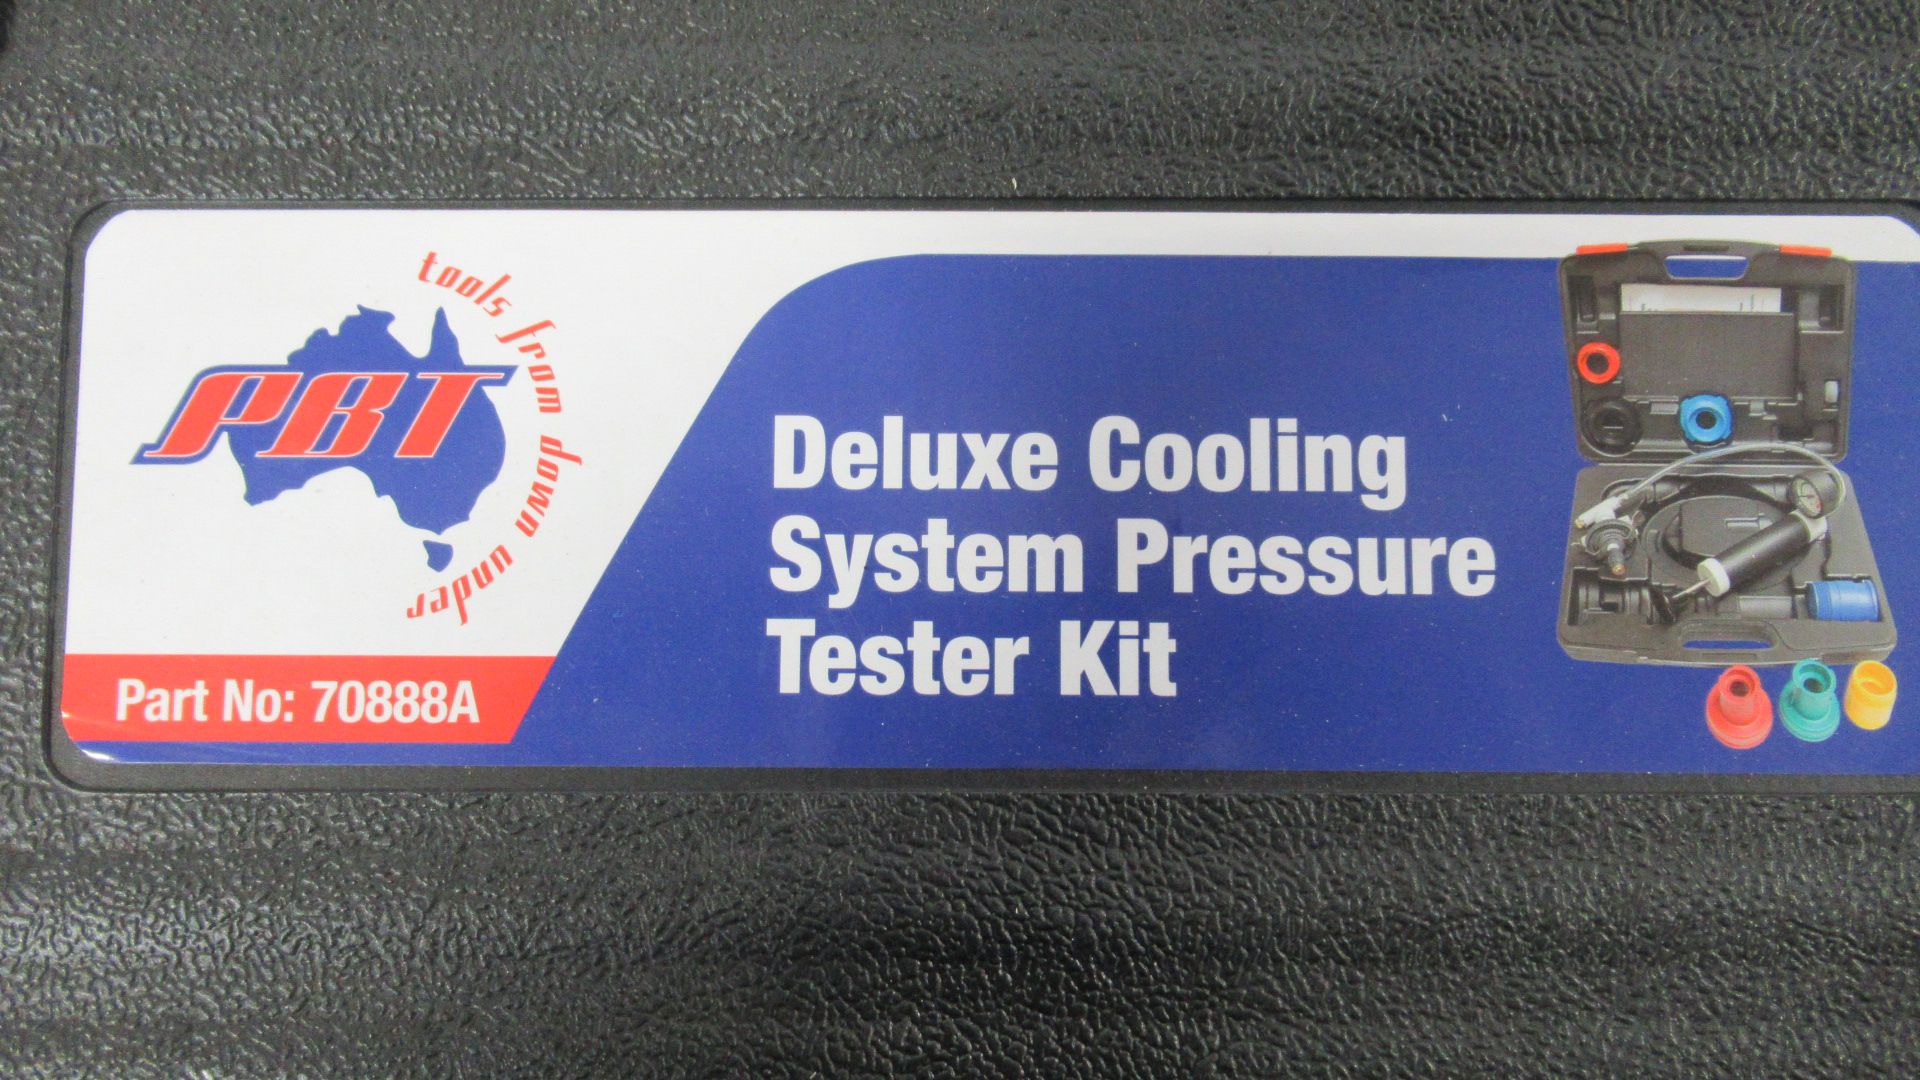 DELUXE COOLING SYSTEM PRESSURE TEST KIT PBT-70888A - Image 2 of 2